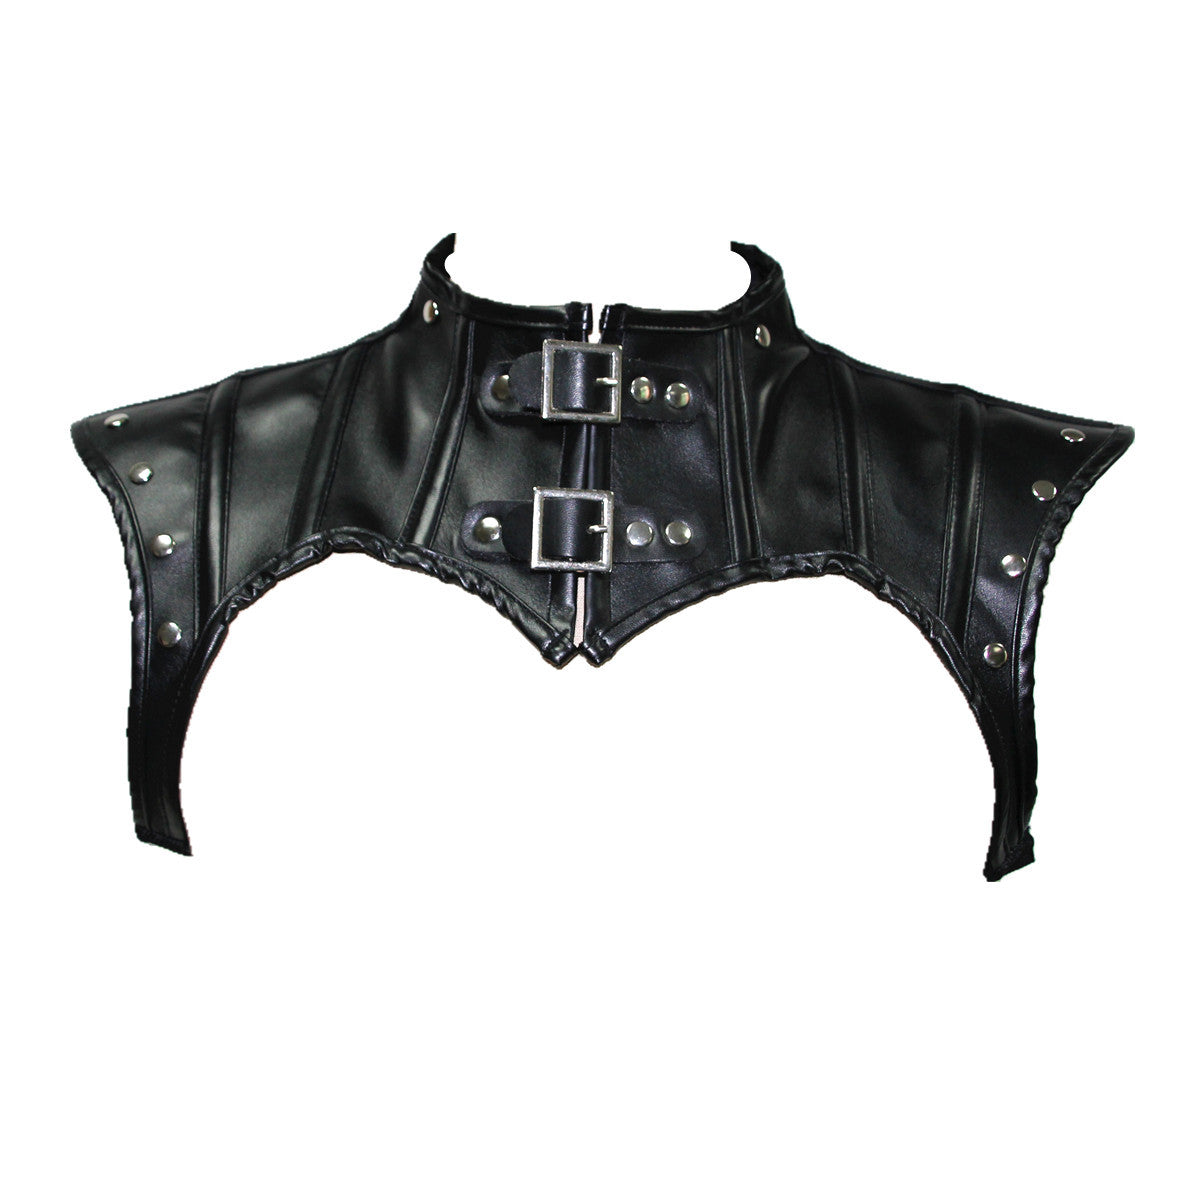 A Ladies Steampunk Leather Corset by Maramalive™ with metal buckles.